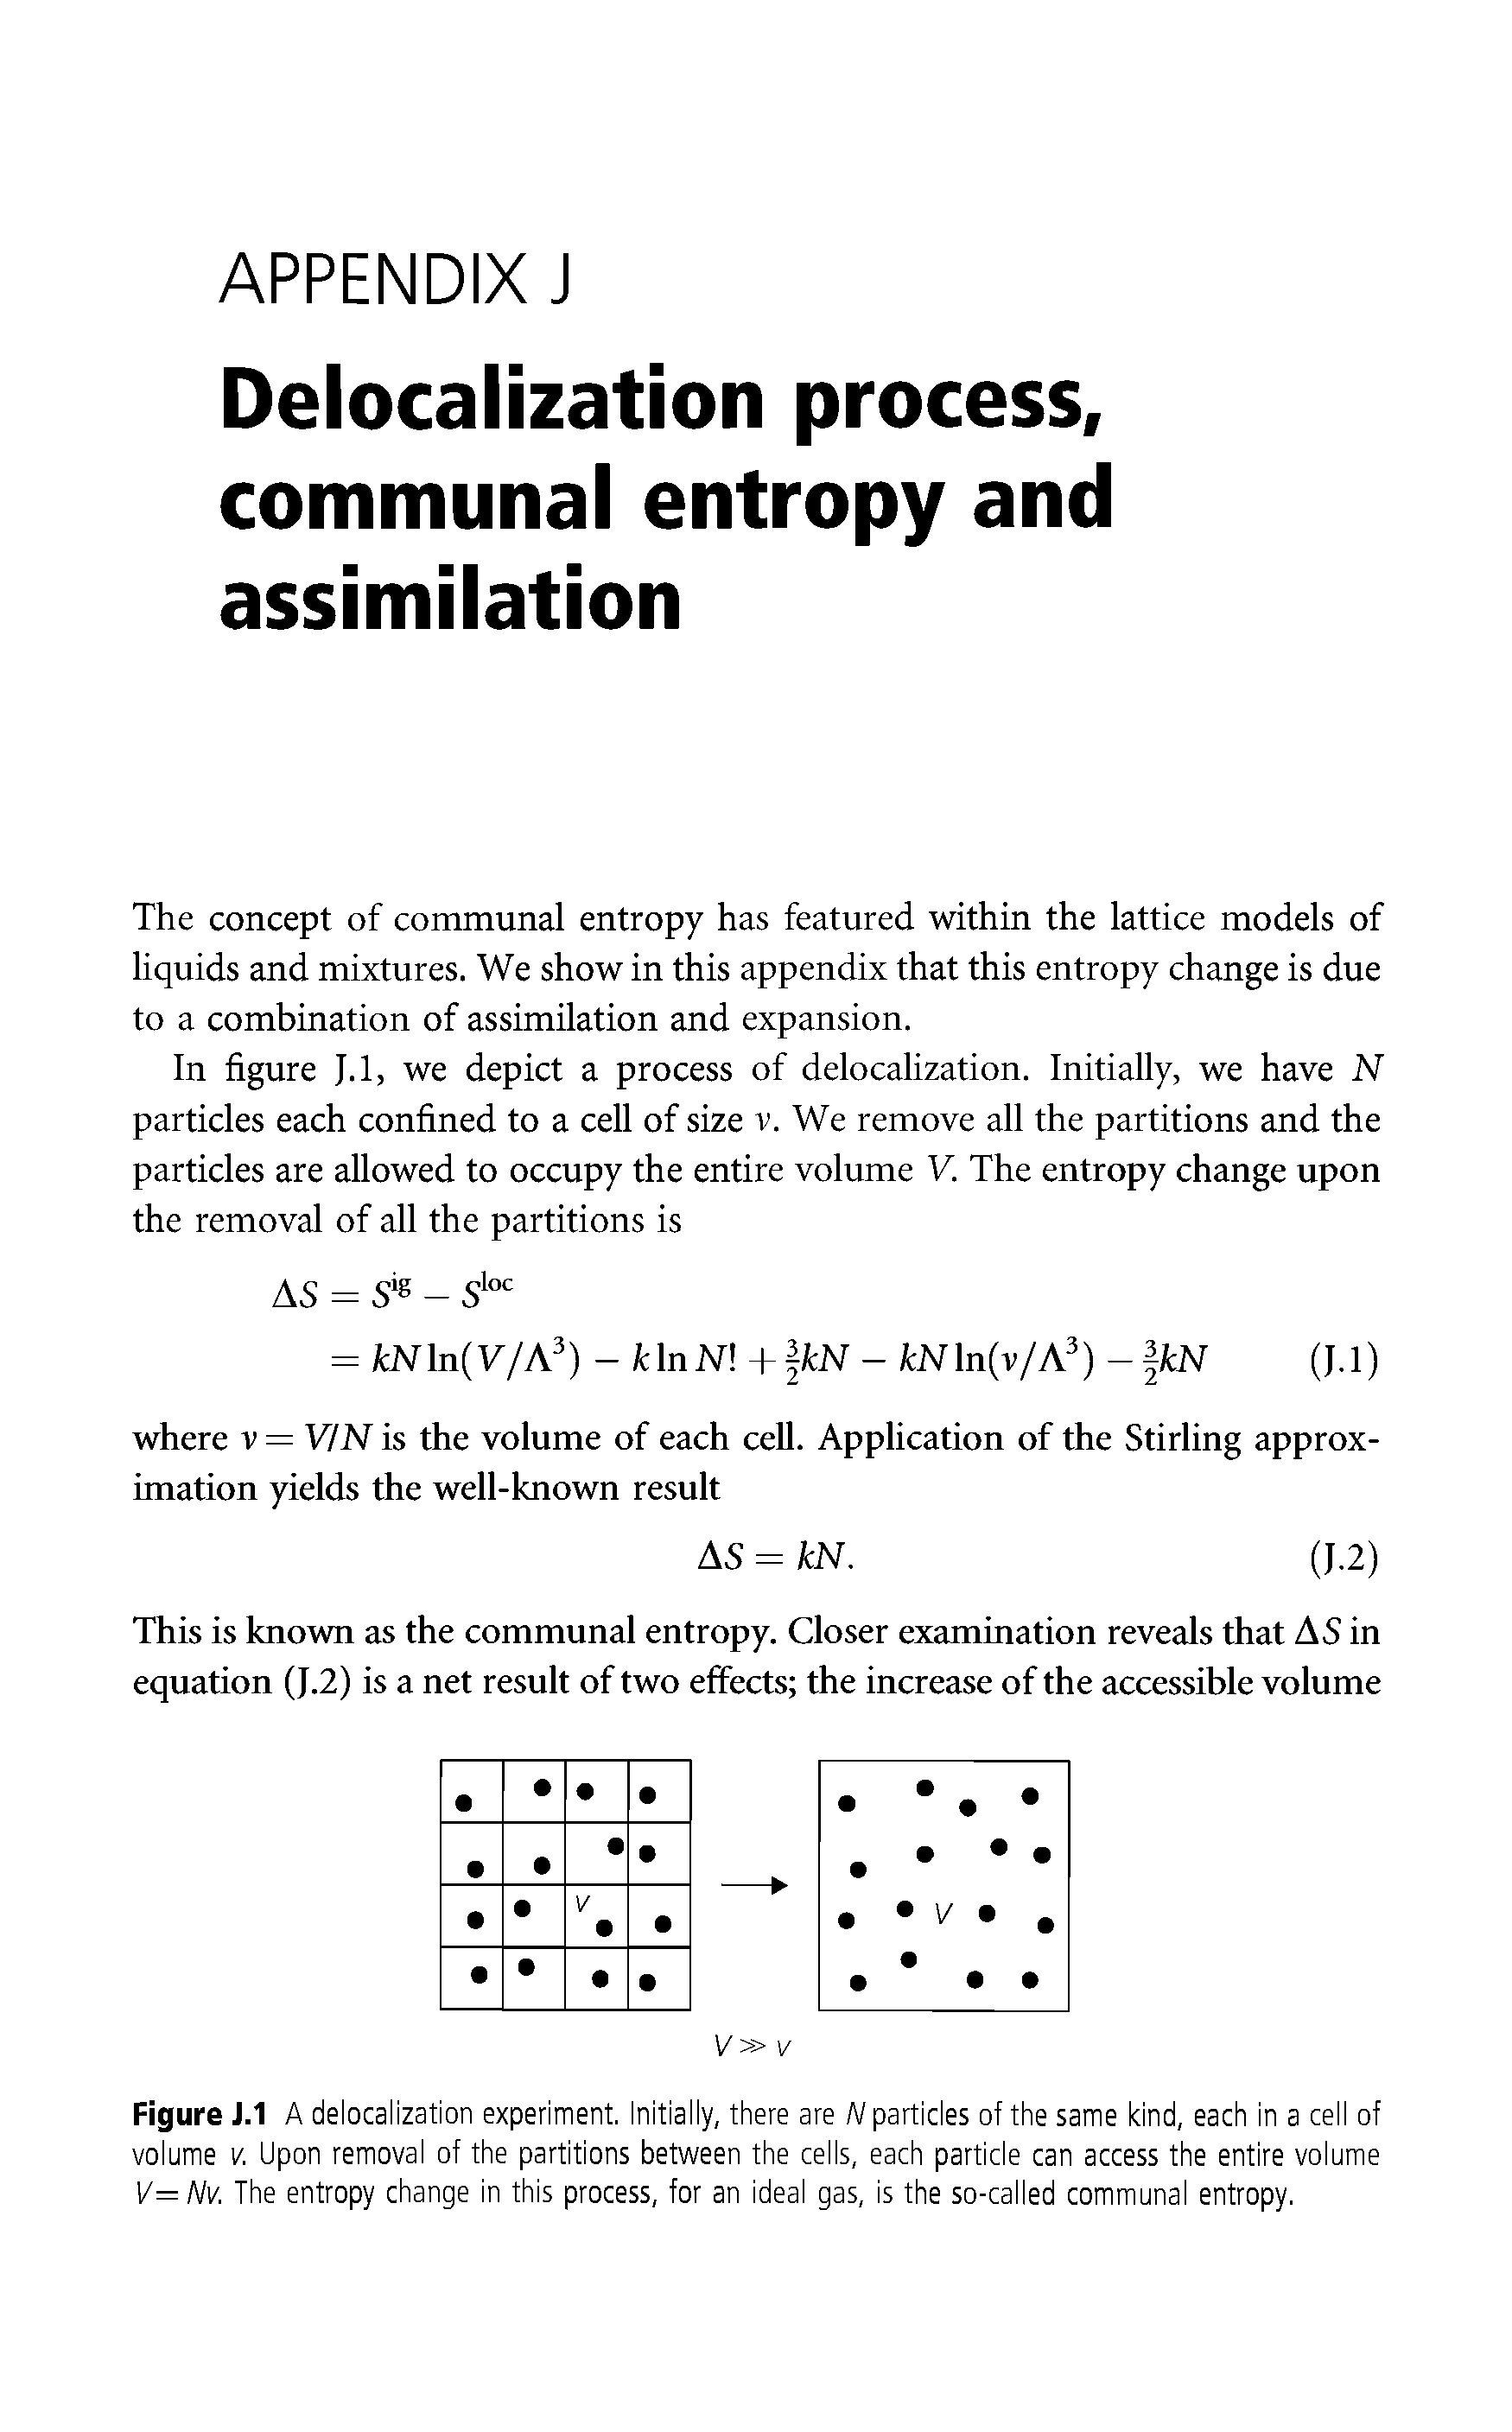 Figure J.1 A delocalization experiment. Initially, there are N particles of the same kind, each in a cell of volume v. Upon removal of the partitions between the cells, each particle can access the entire volume V-Nv. The entropy change in this process, for an ideal gas, is the so-called communal entropy.